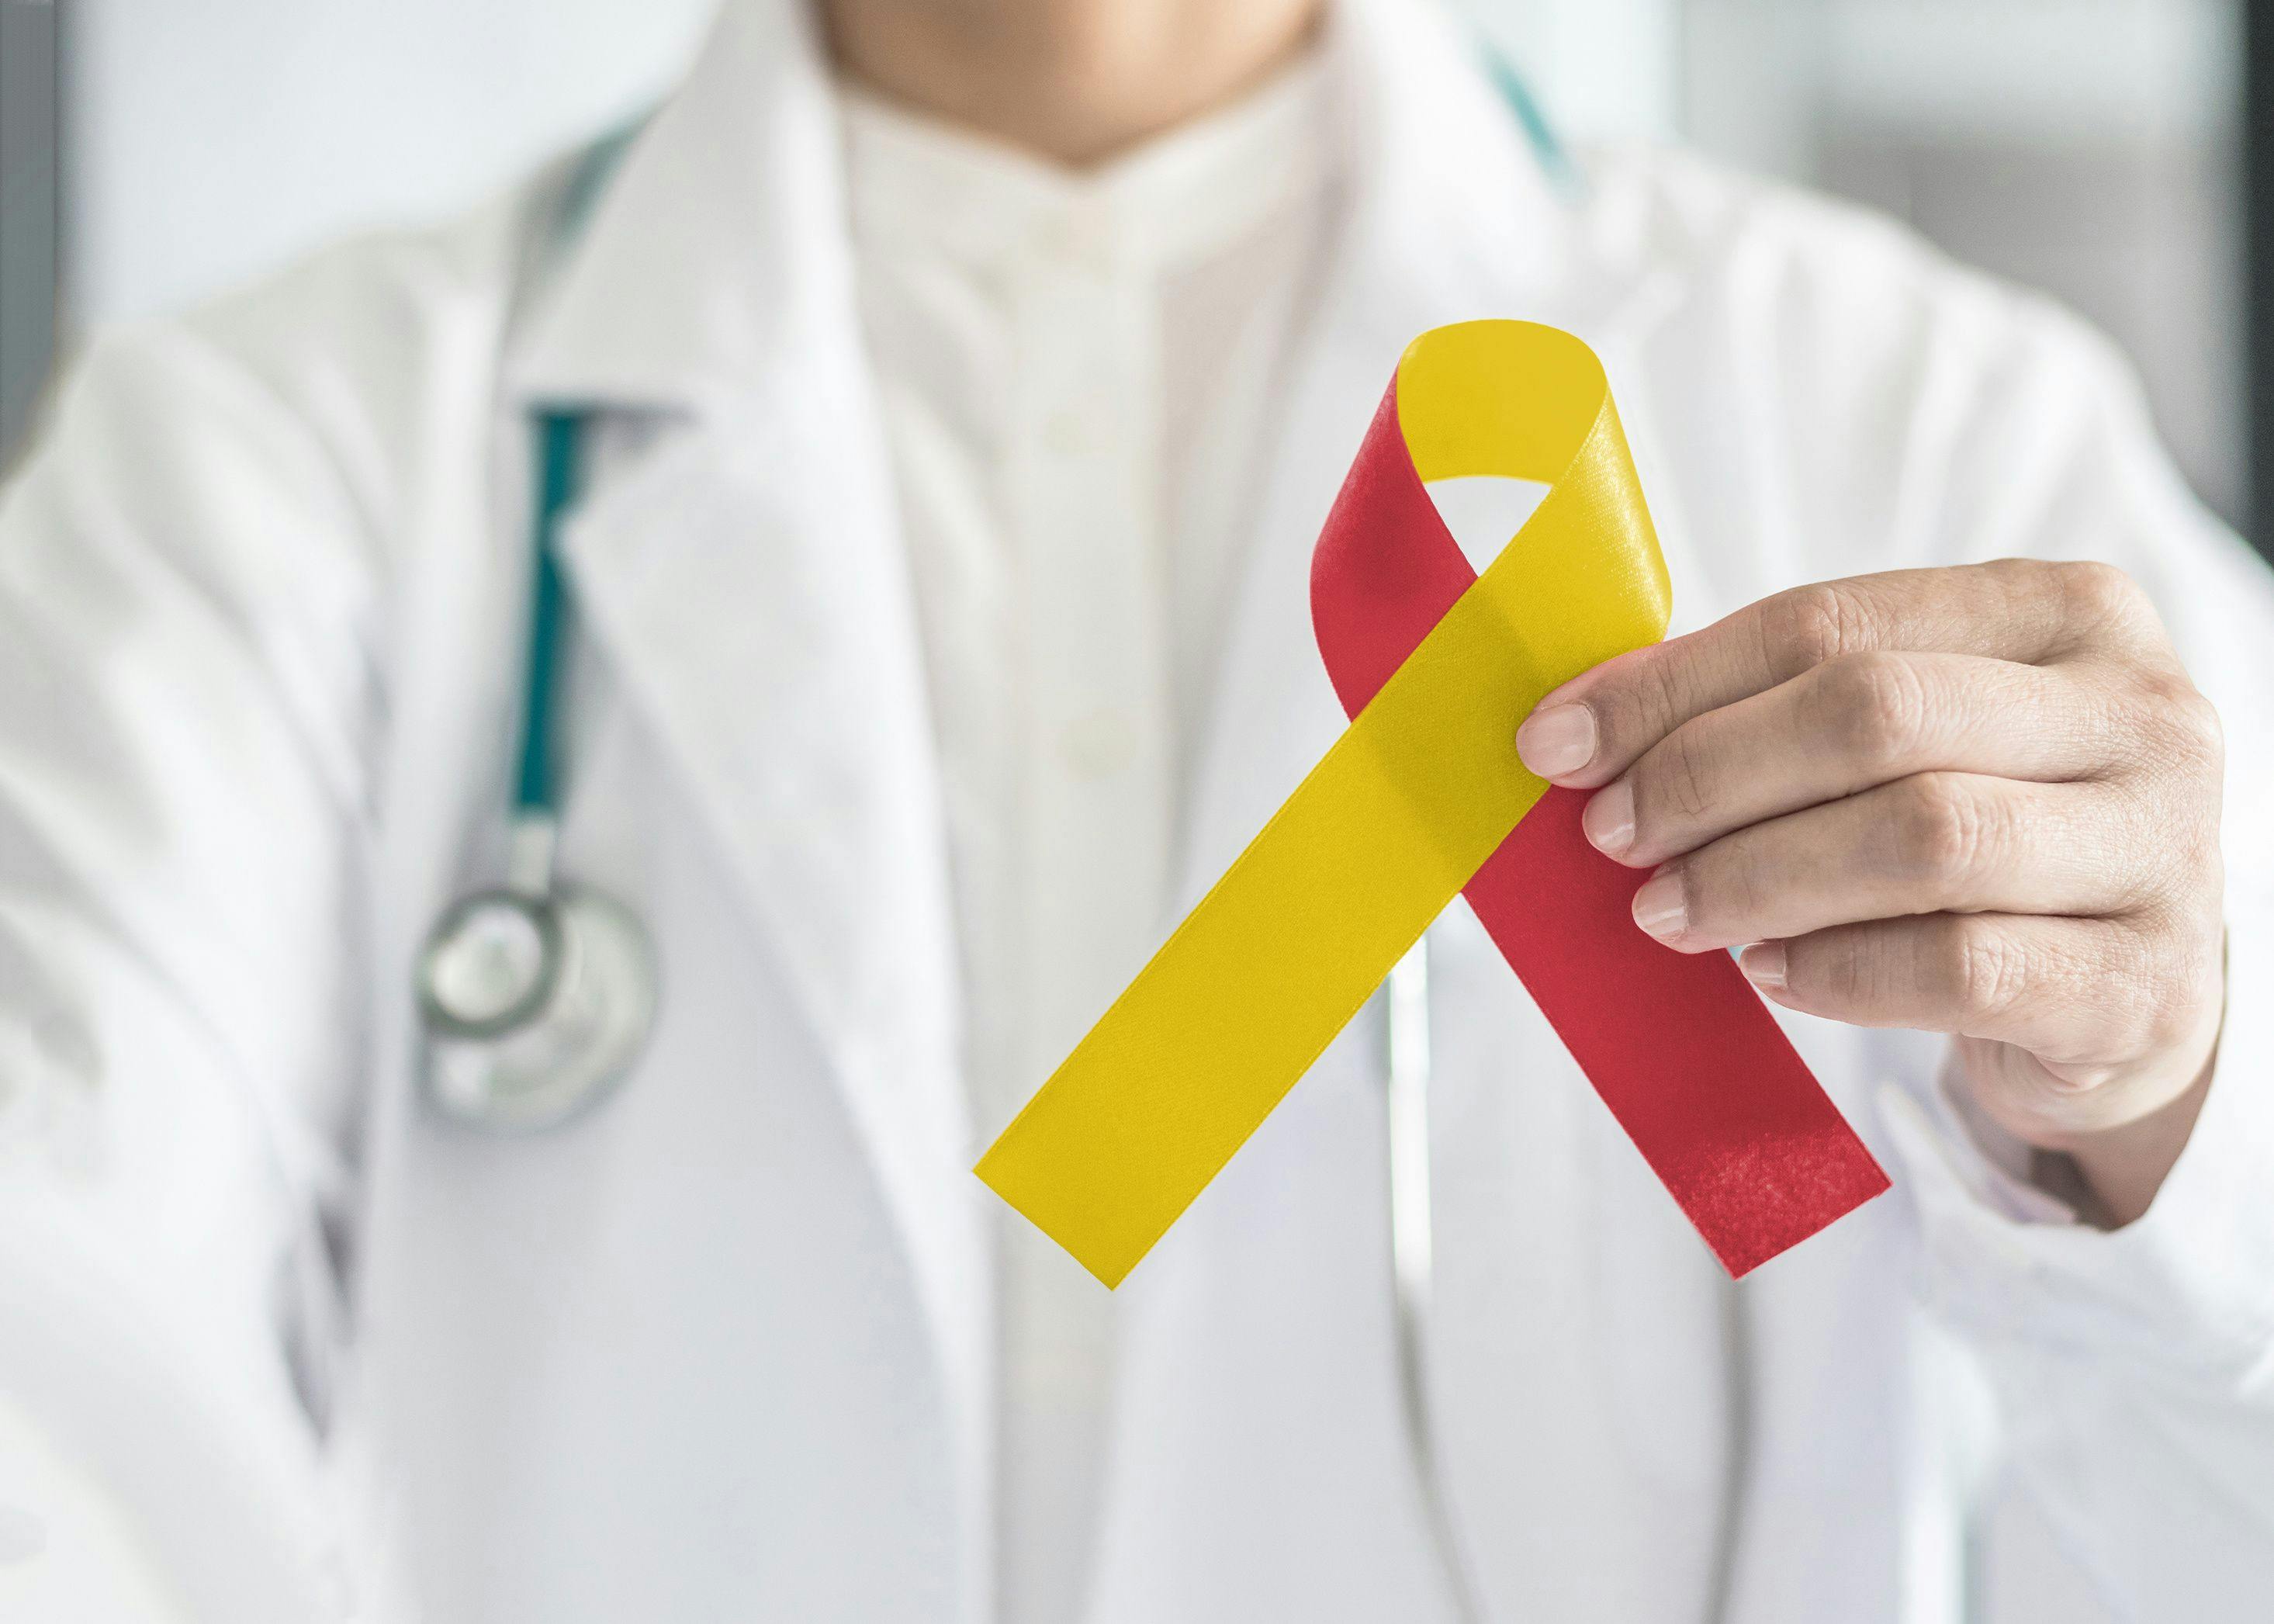 World hepatitis day and HIV/ HCV co-infection awareness with red yellow ribbon in medical doctor hand symbolic bow color to support patient with illness and hepatic disease | Image credit: Chinnapong - stock.adobe.com 